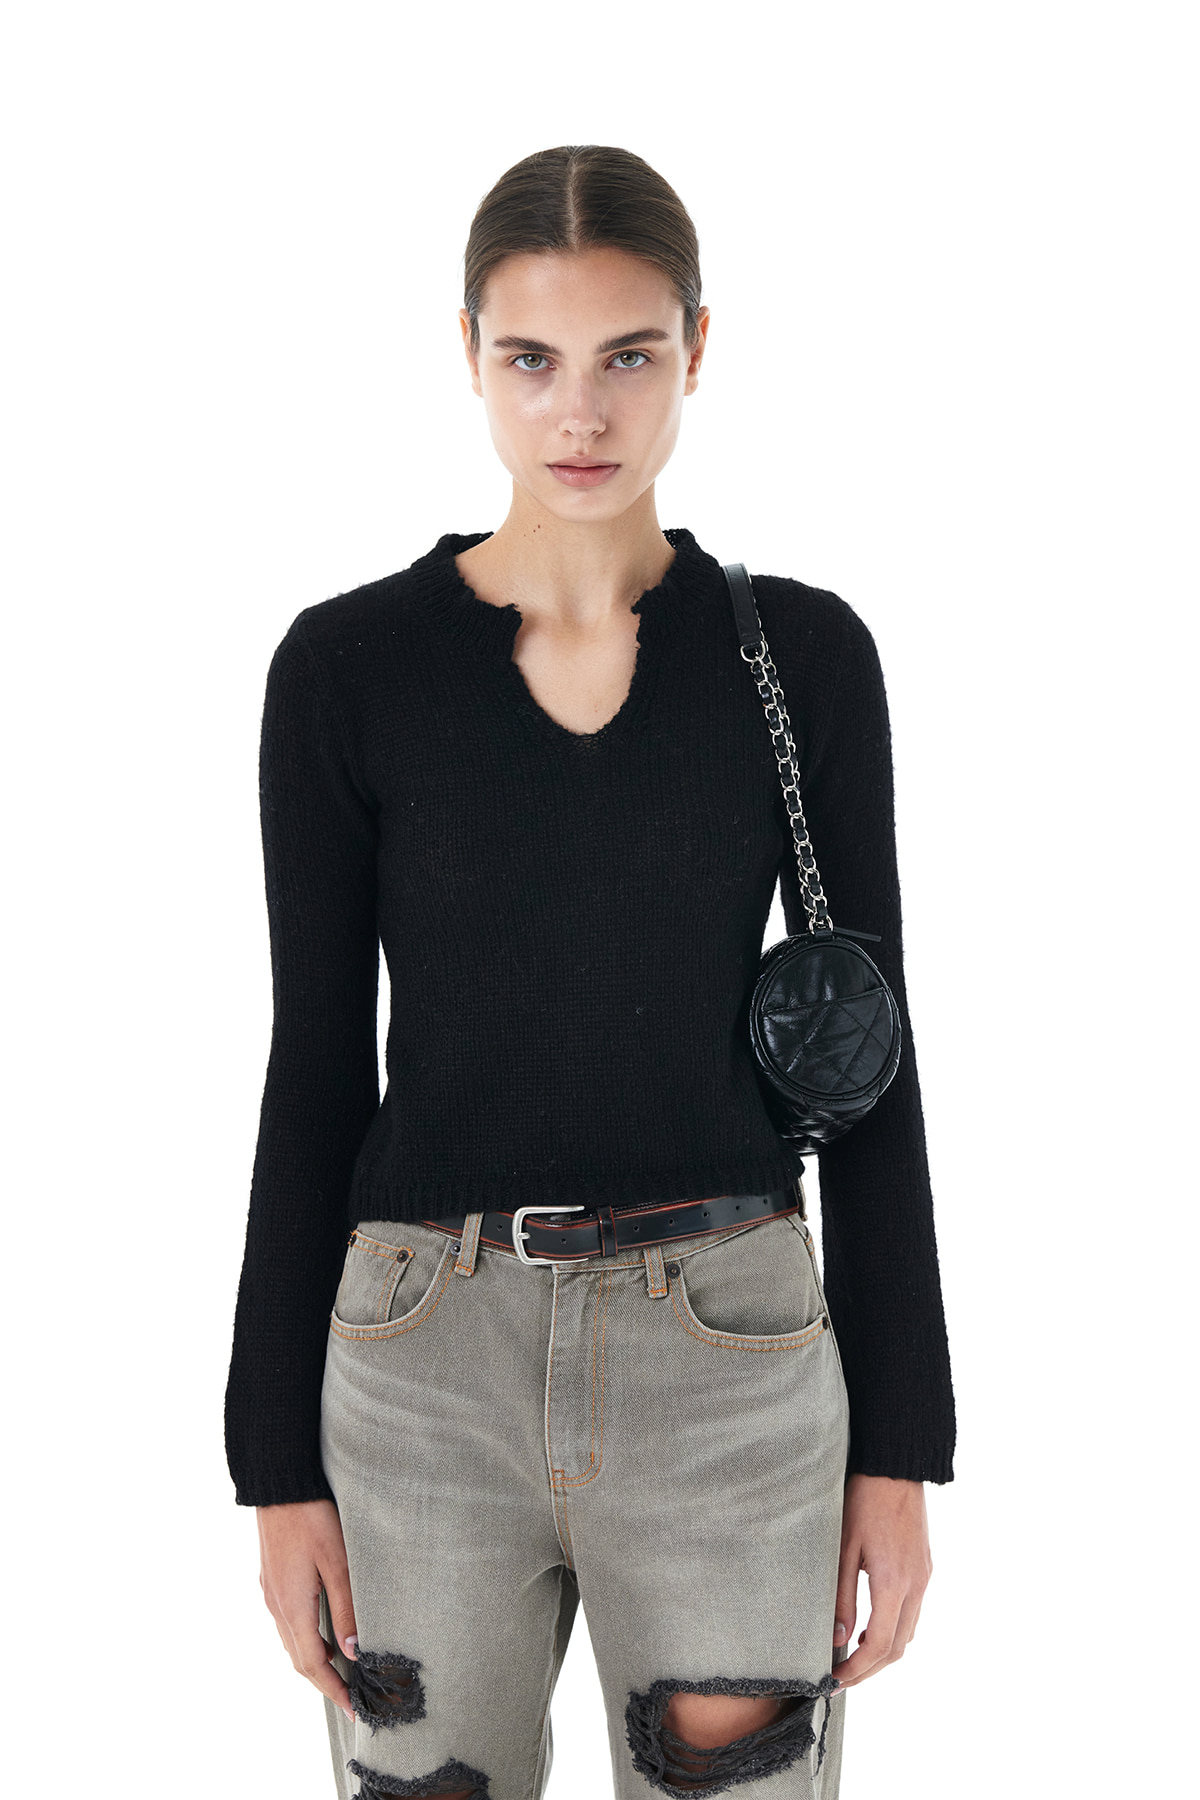 HENLY NECK KNIT TOP IN BLACK